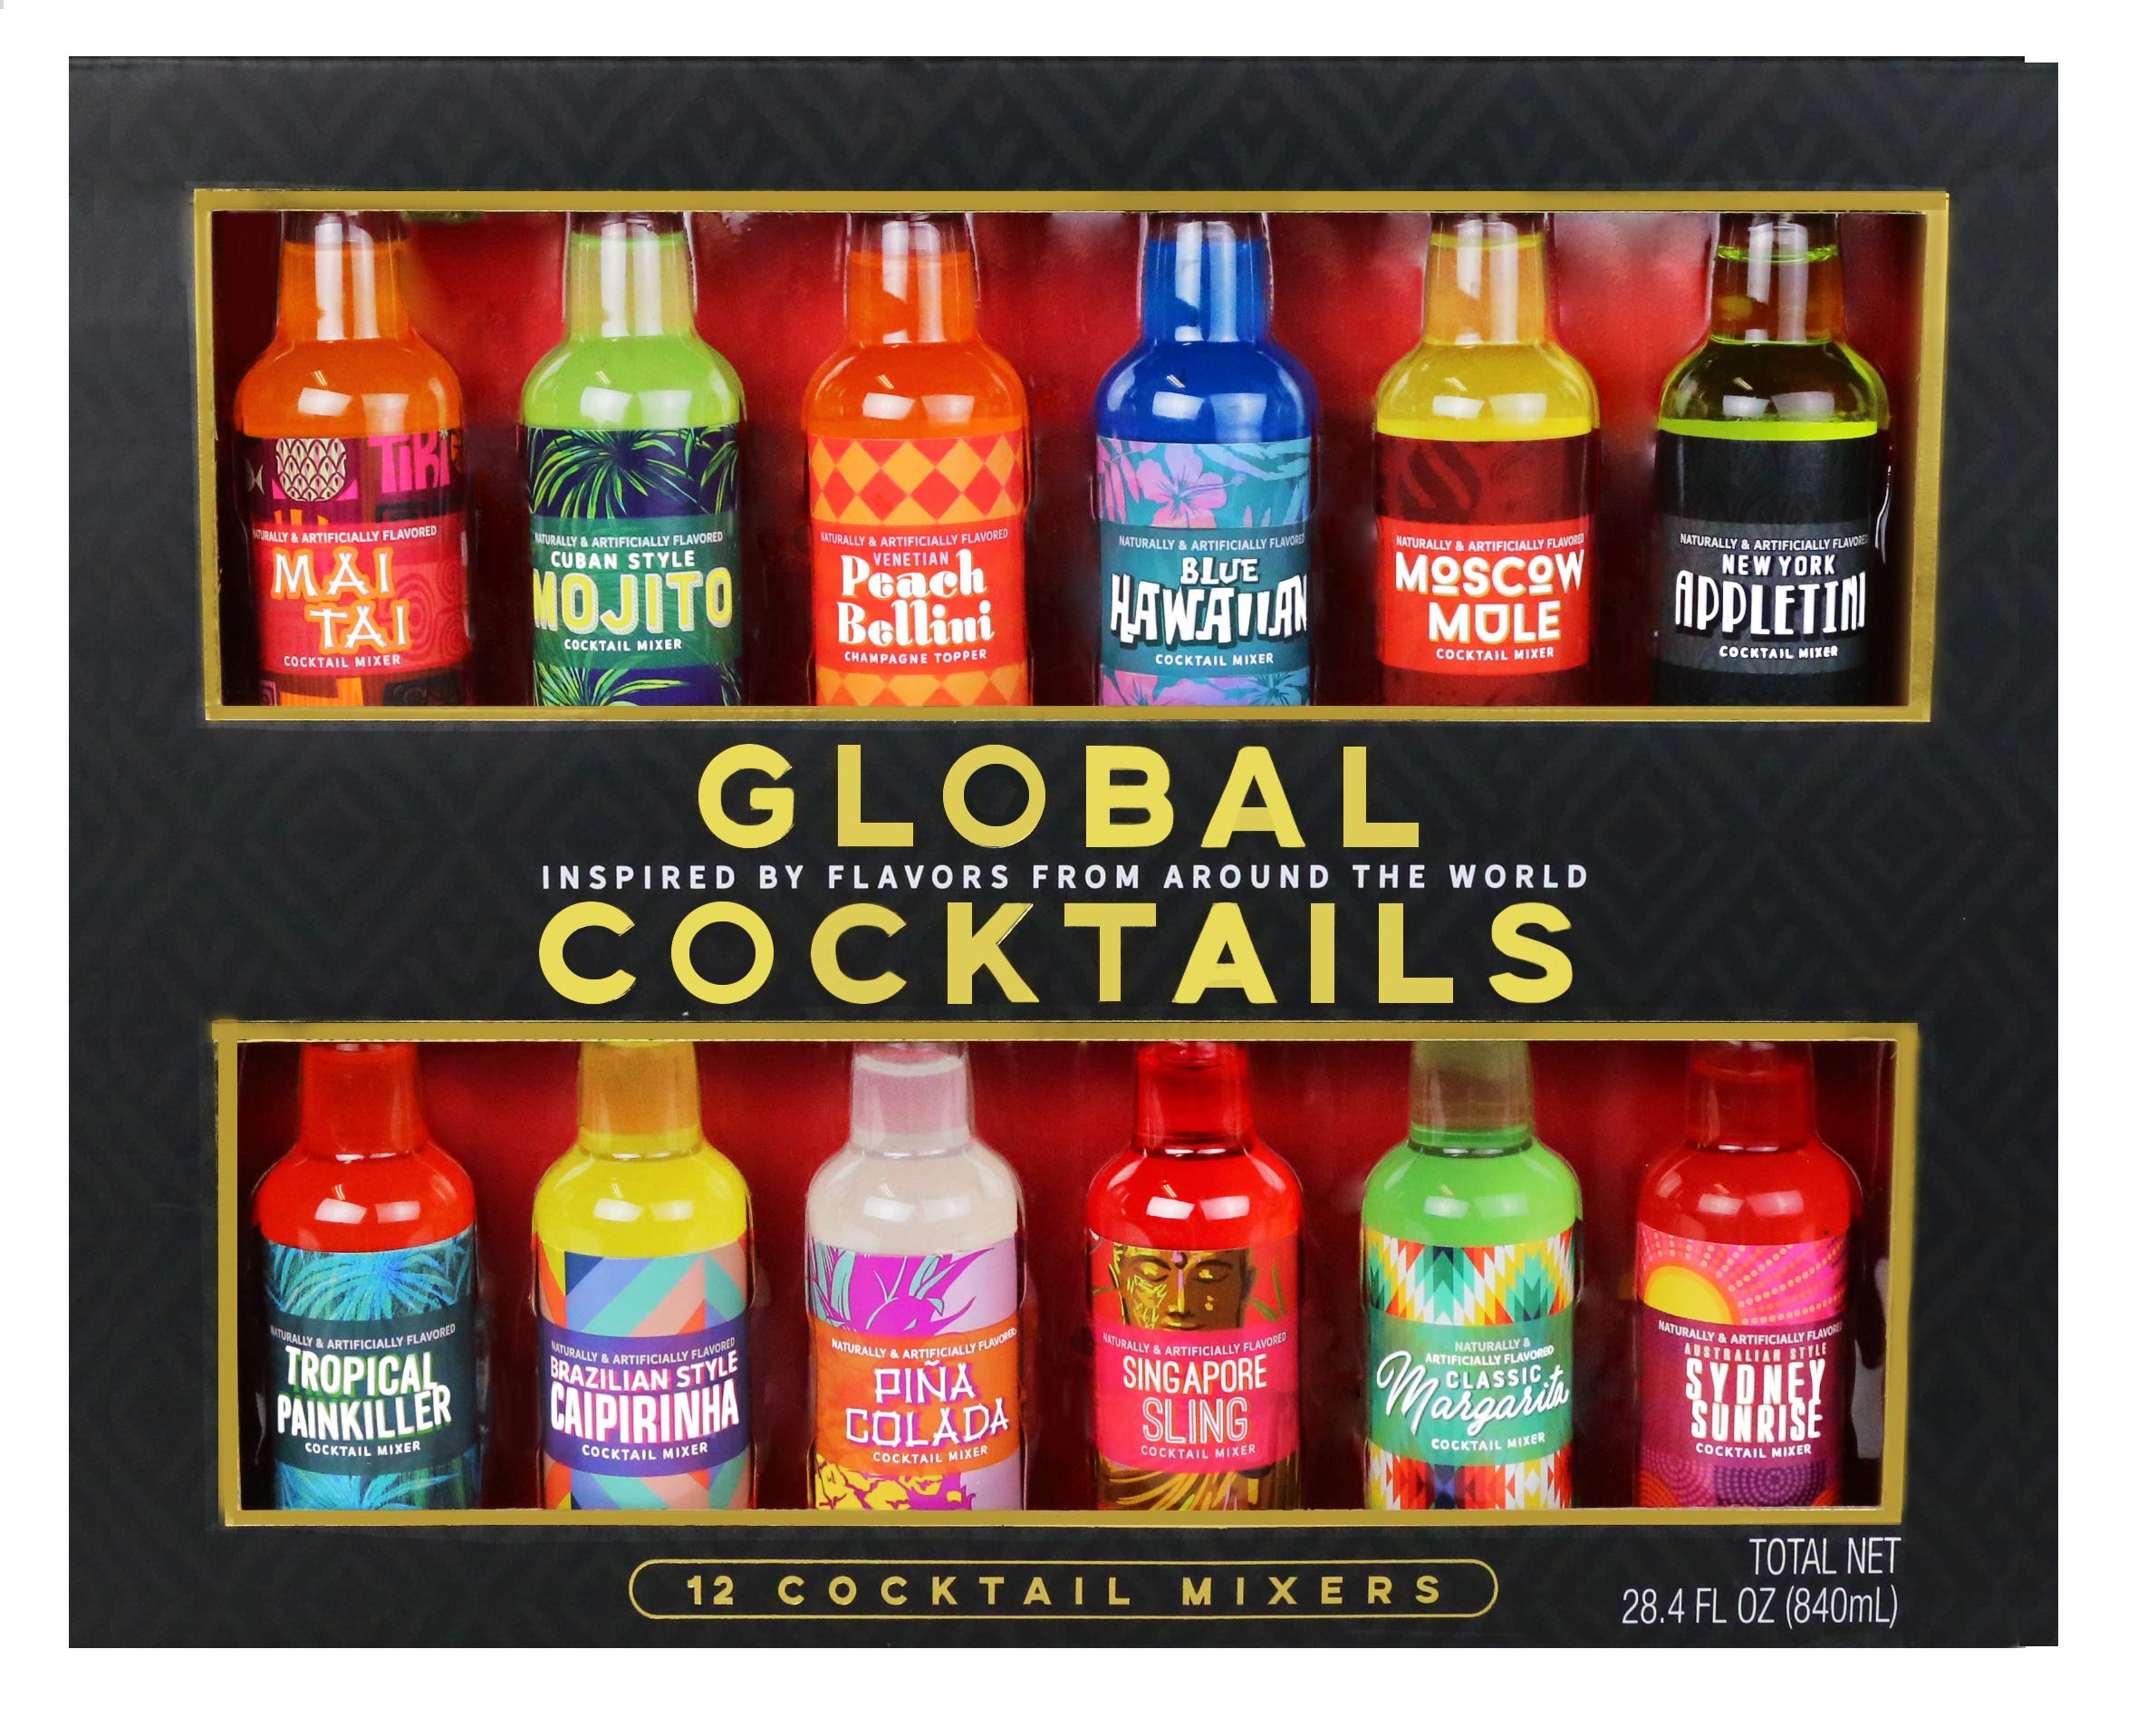 Thoughtfully Gifts Global Cocktail Mixers 2.3 Fluid Ounces Each Mixes of  Classic Margarita Cuban Style Mojito New York Appletini Pina Colada Blue  Hawaiian Set of 12(Contains NO Alcohol)